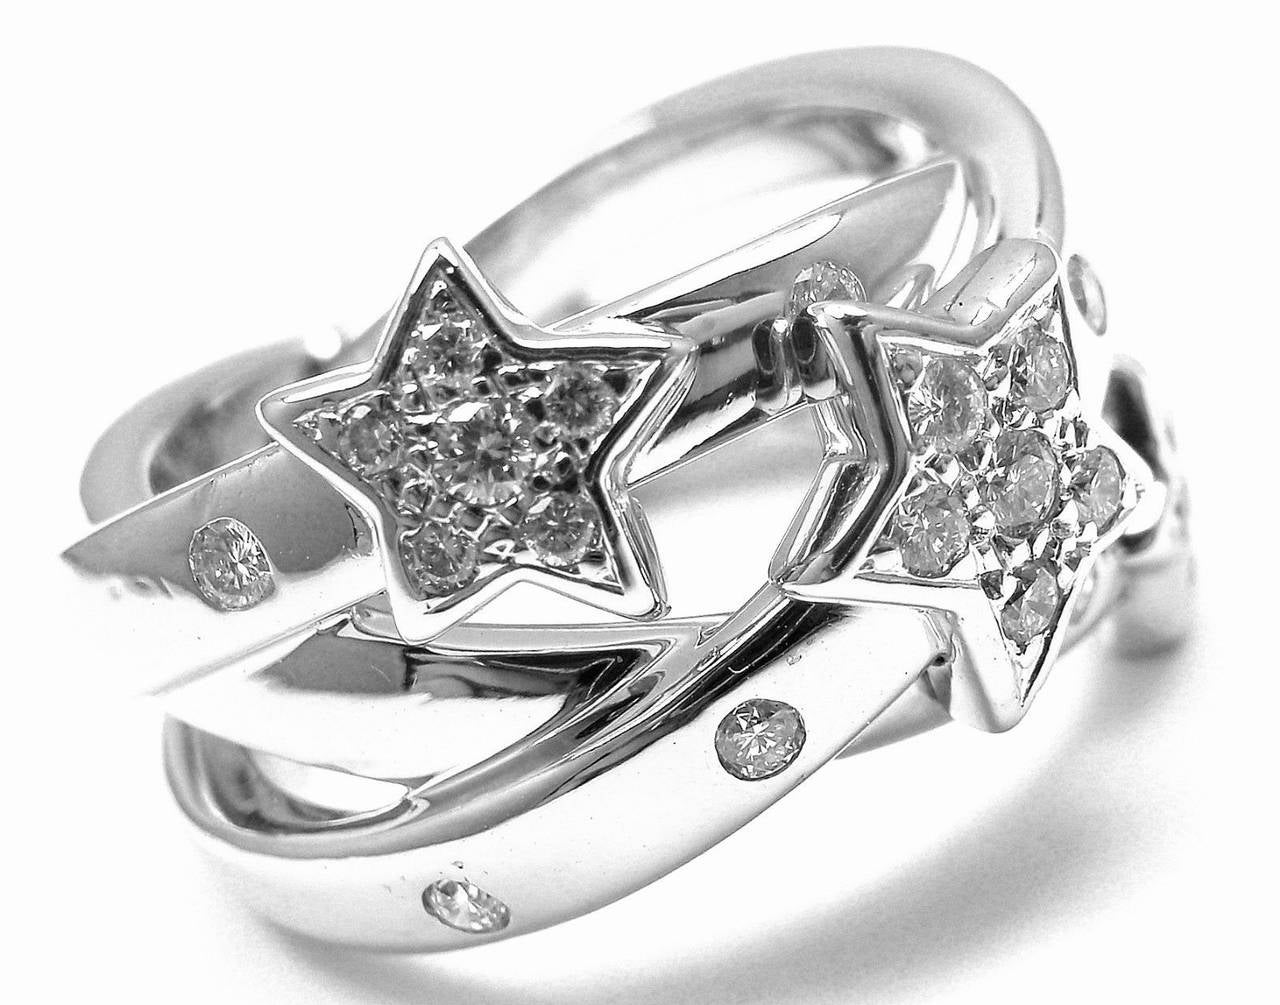 18k White Gold Comete Star Diamond Ring by Chanel. 
With 25 round brilliant cut diamonds, VS1 clarity, G color. Total Diamond Weight: .50ct. 

Details: 
Size: 5.5
Width: 12mm
Weight: 17.2 grams
Stamped Hallmarks: Chanel 750 7K1049 51
*Free